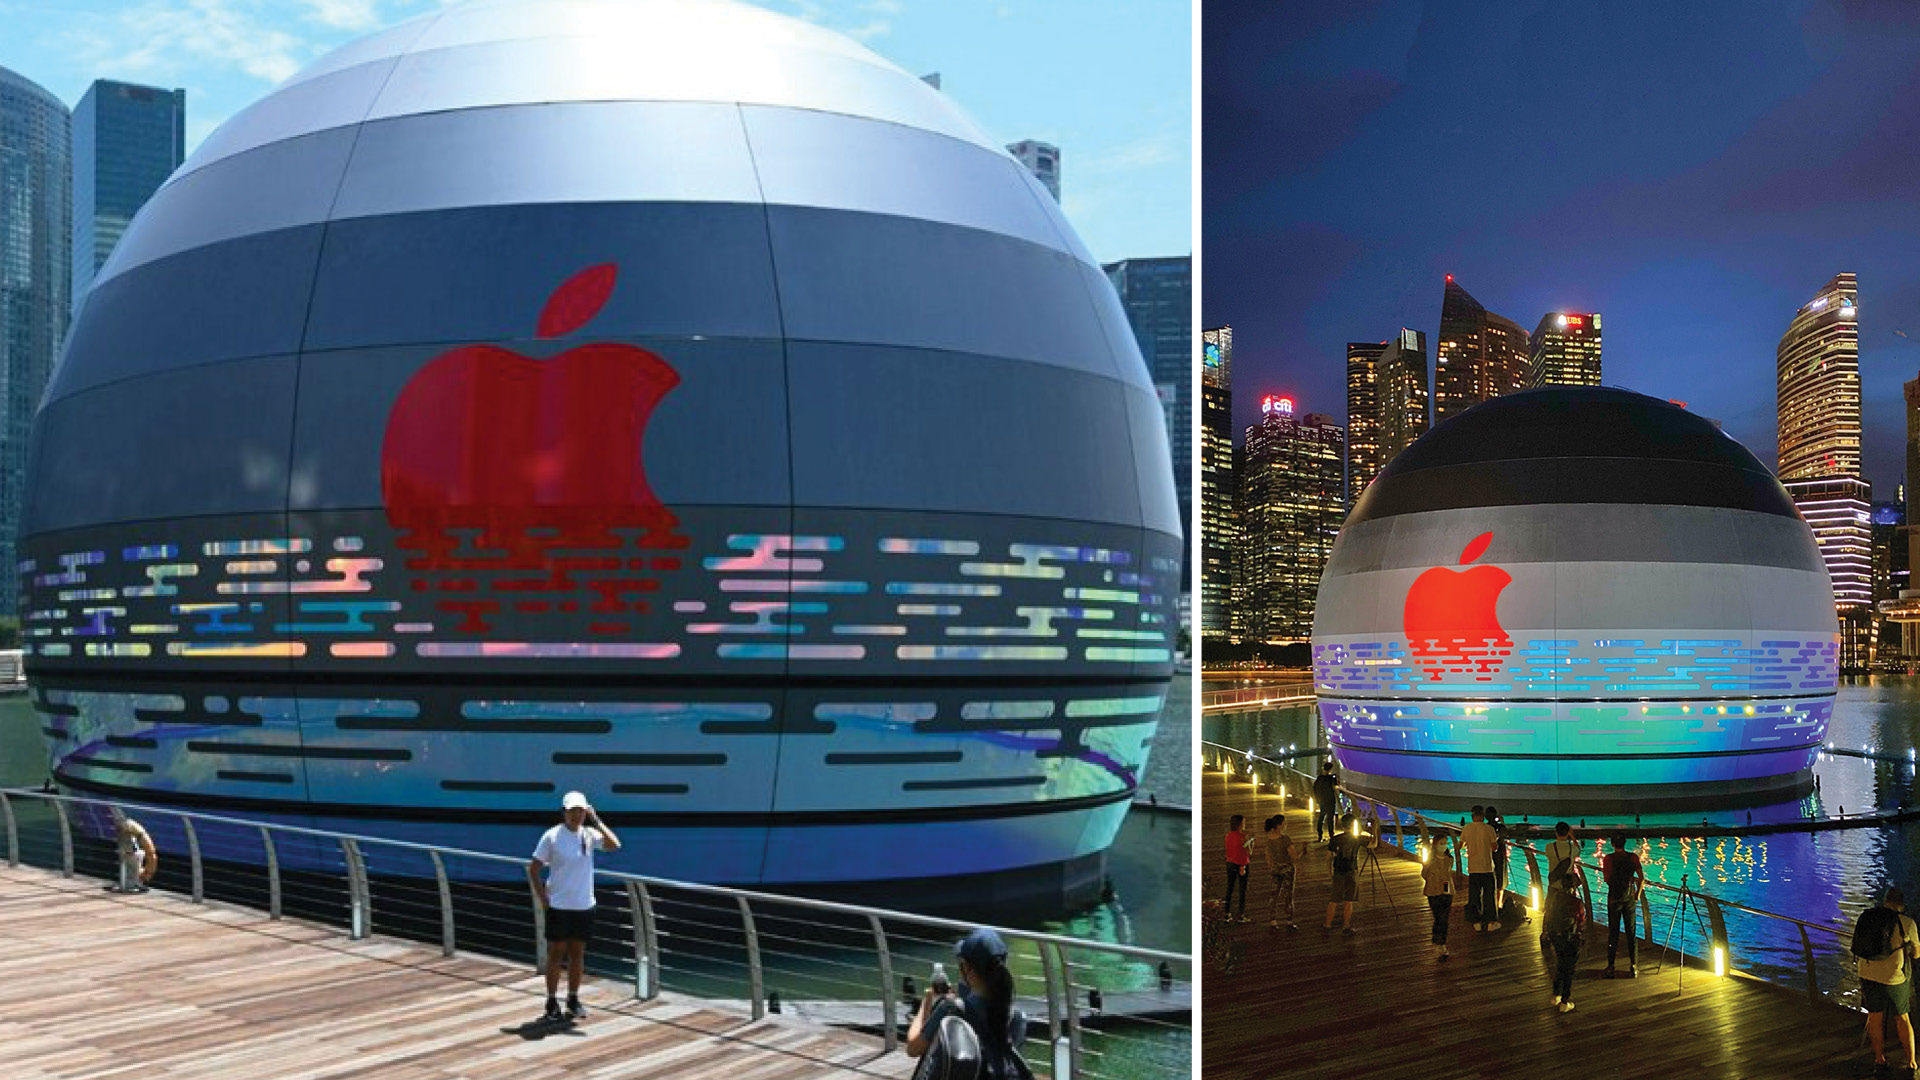 Apple to open world's first floating retail store at Marina Bay Sands in  Singapore - Apple's floating store